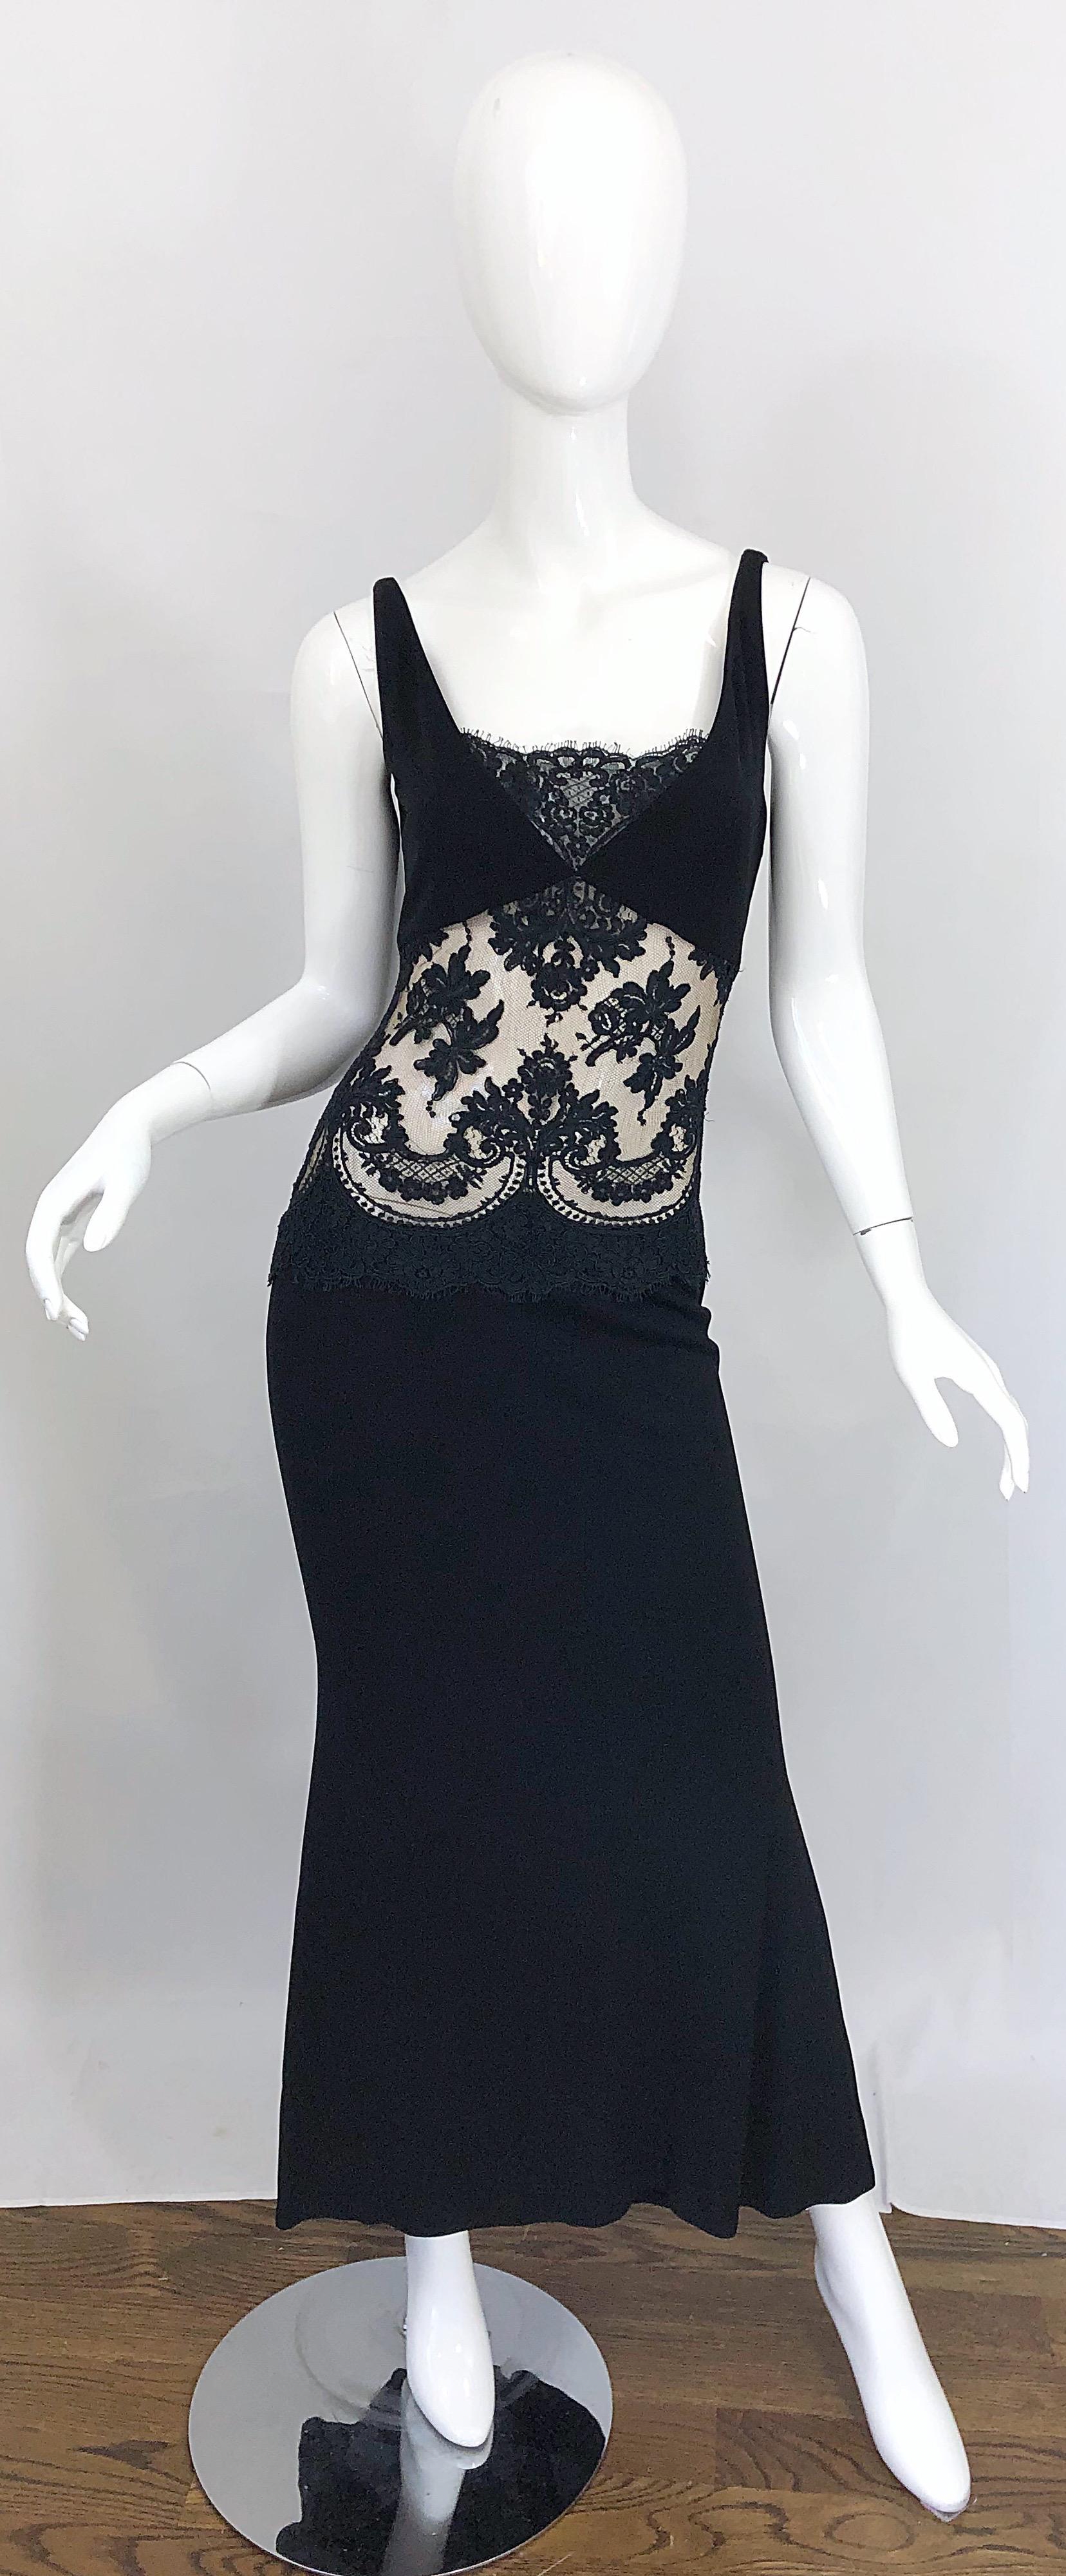 Sexy 1990s RANDOLPH DUKE Couture black cut-out evening gown dress! Features a soft double ply rayon/silk blend fabric that offers some stretch. Sheer black lace panels at front and back reveal just the right amount of skin. Tailored bodice with a